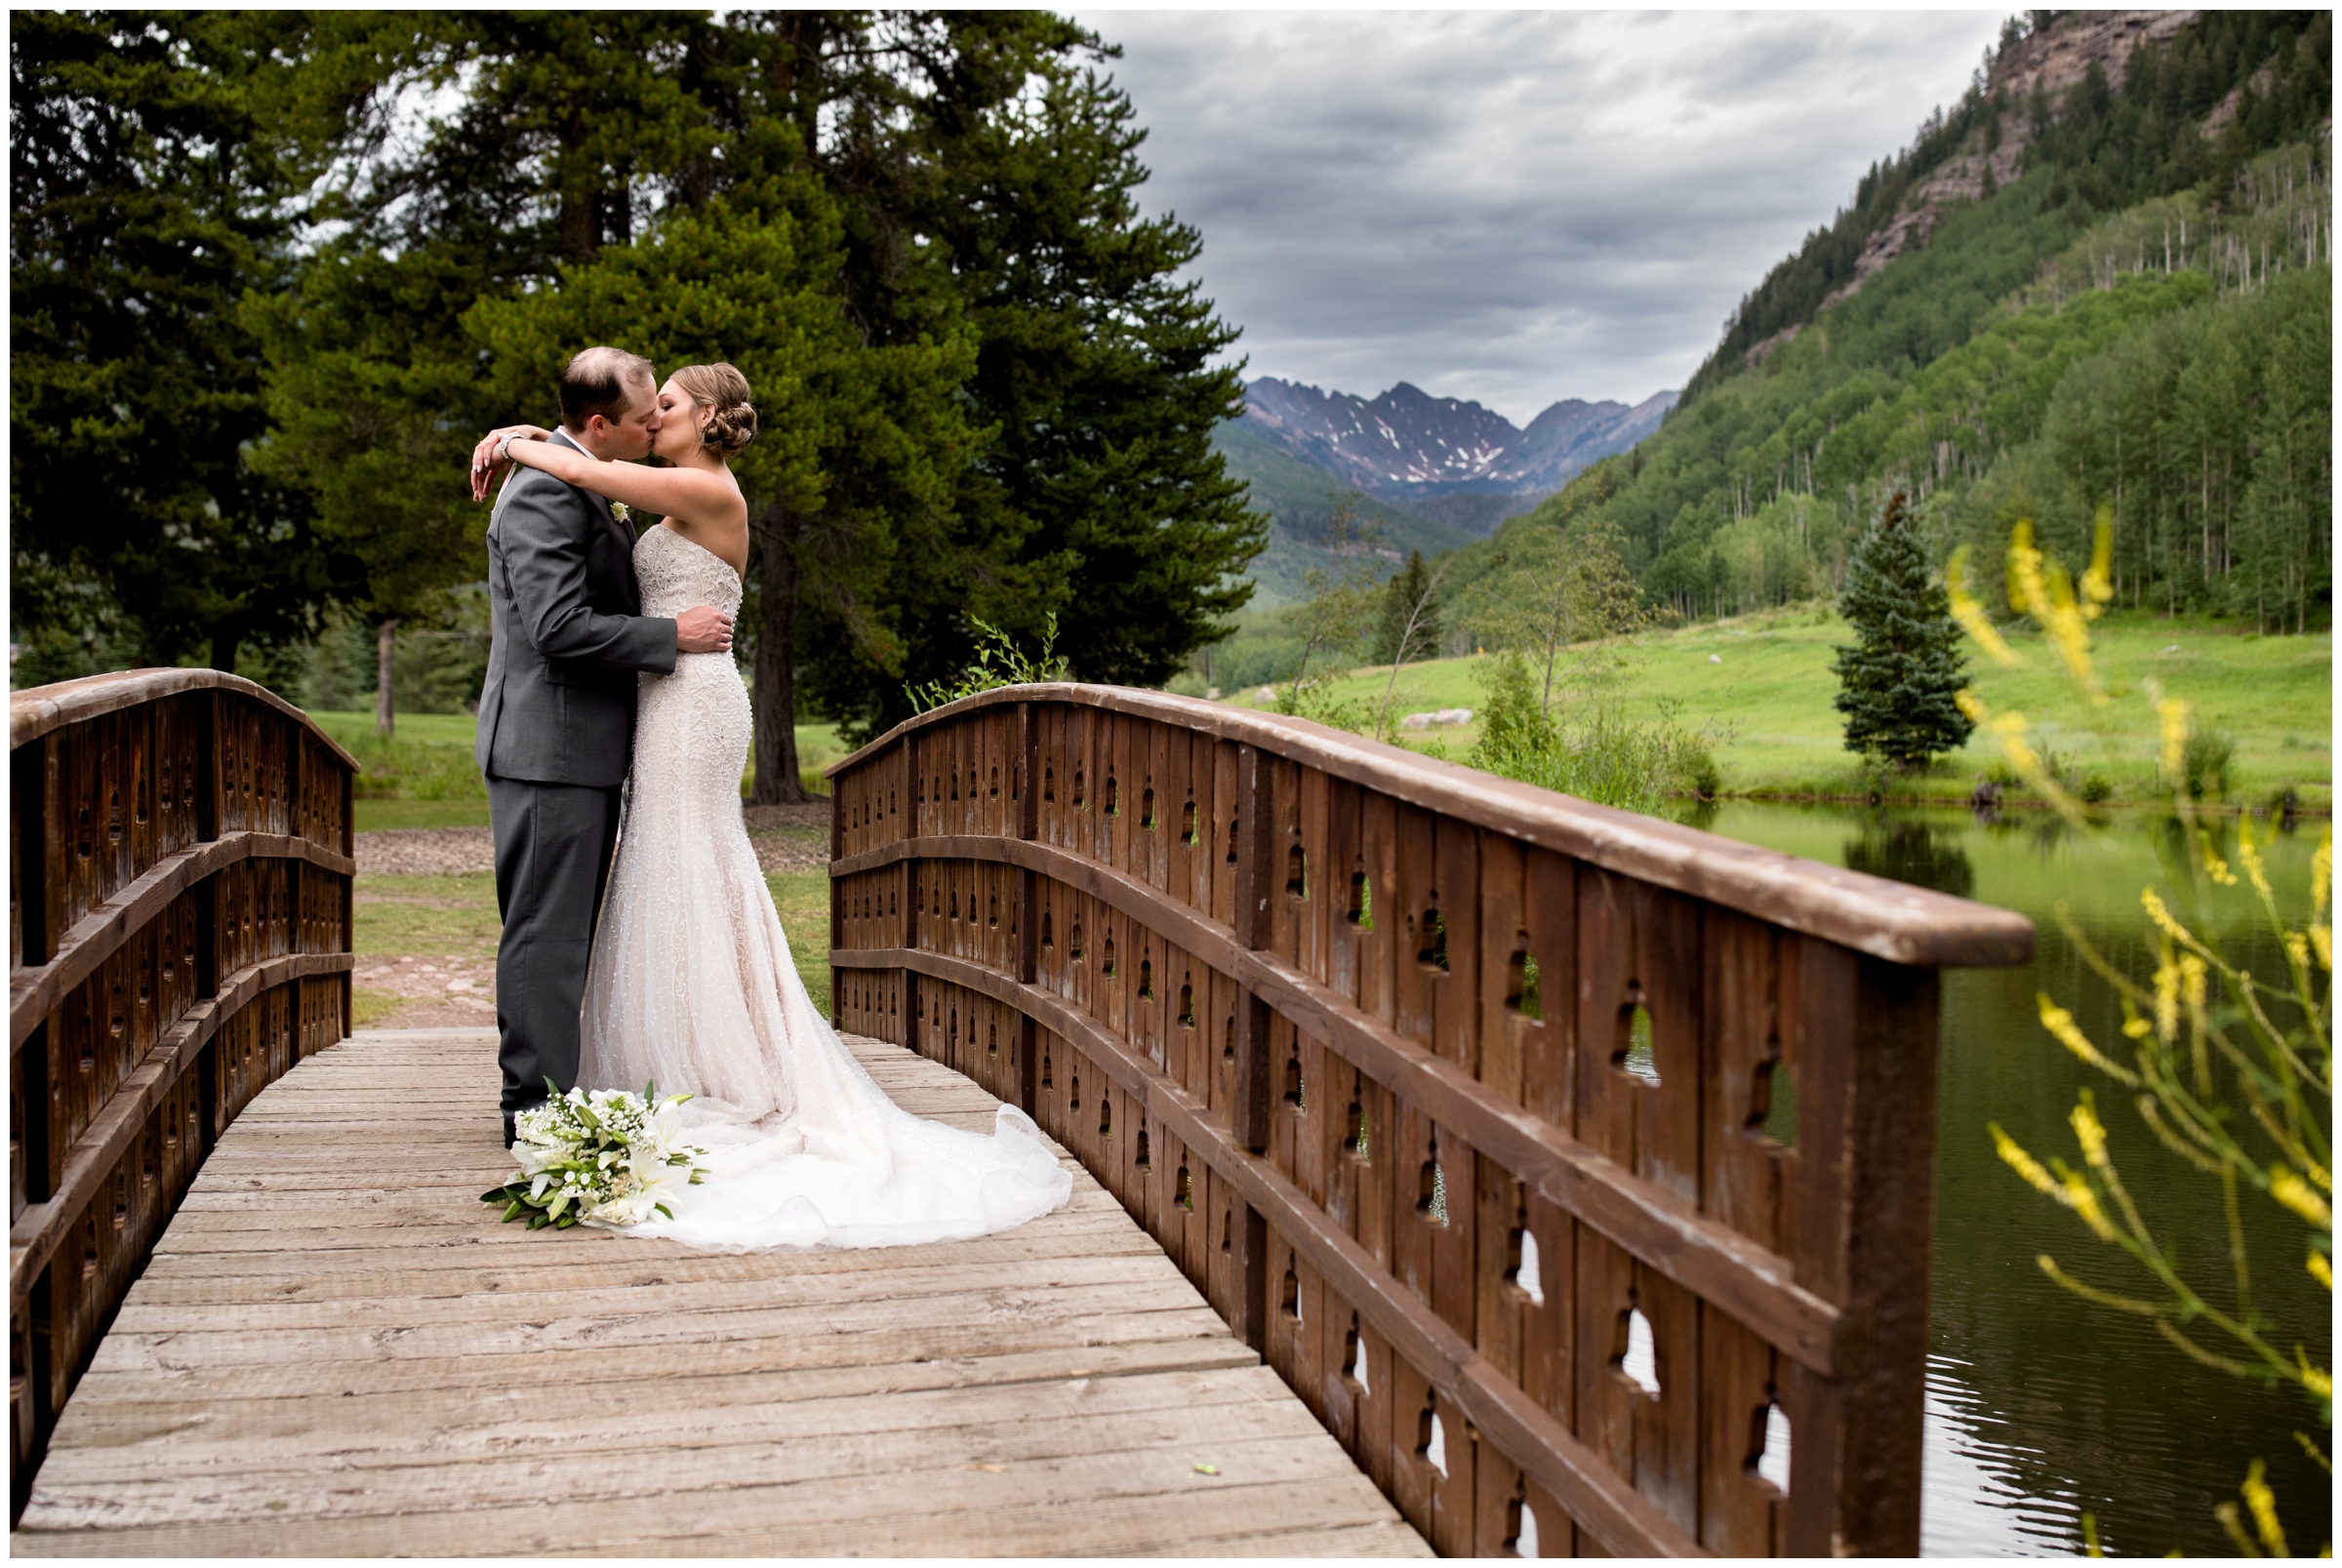 Vail golf club wedding inspiration in the Colorado mountains by Vail wedding photographer Plum Pretty Photography